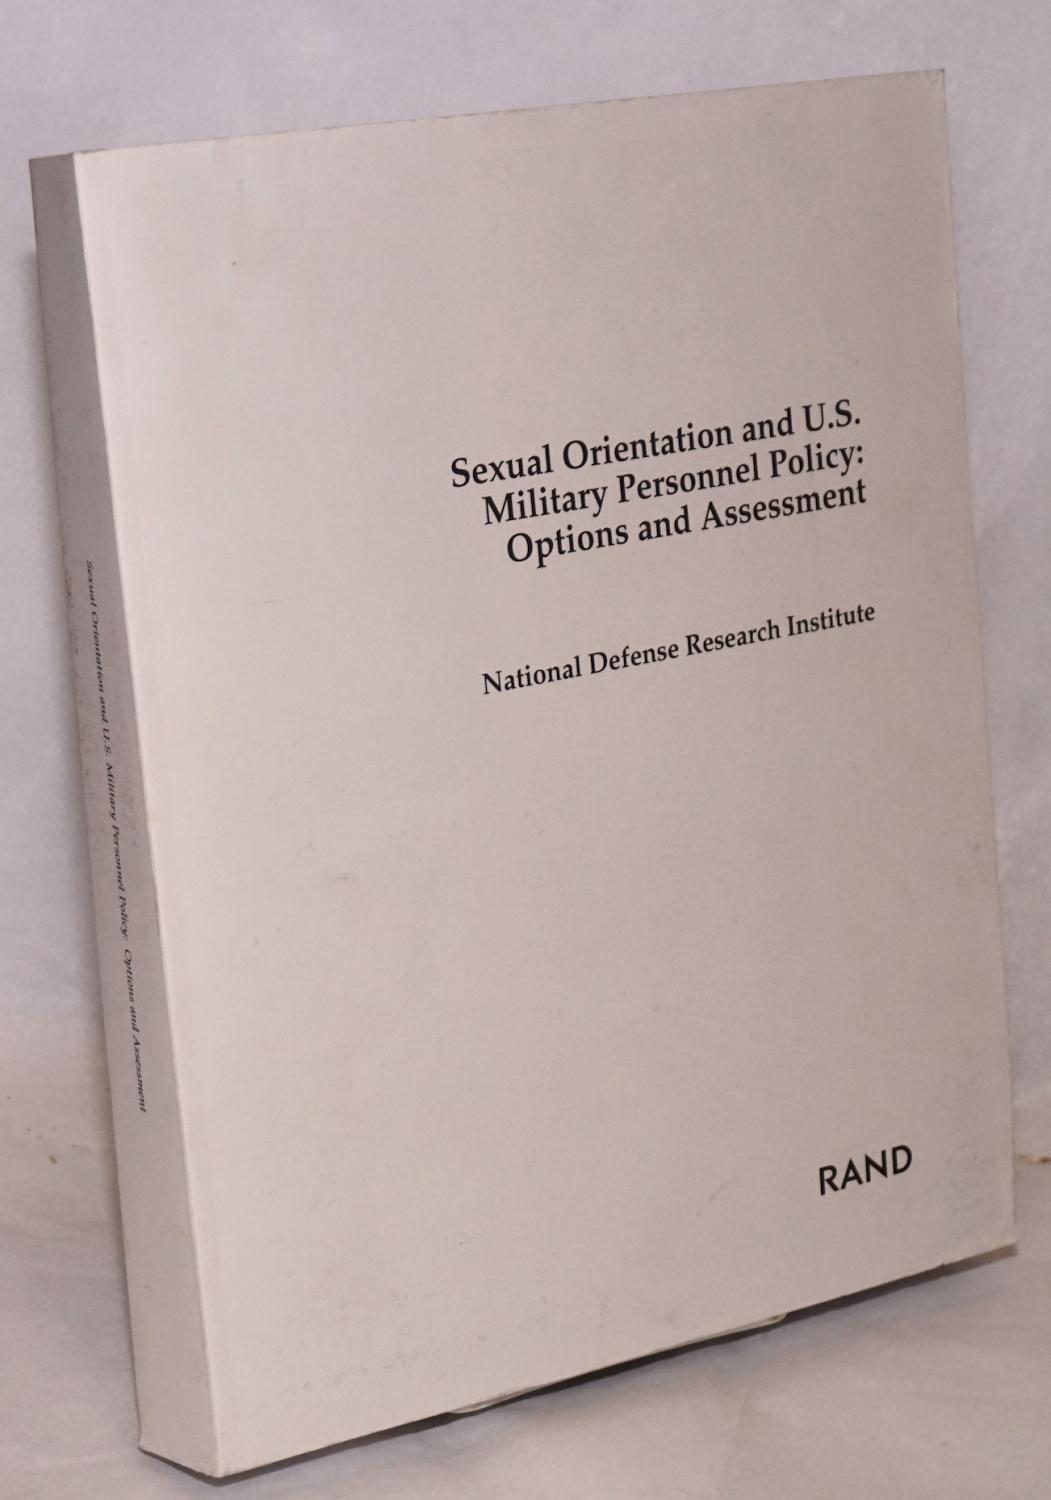 Sexual orientation and U. S. Military personnel policy: options and assessment - RAND, National Defense Research Institute